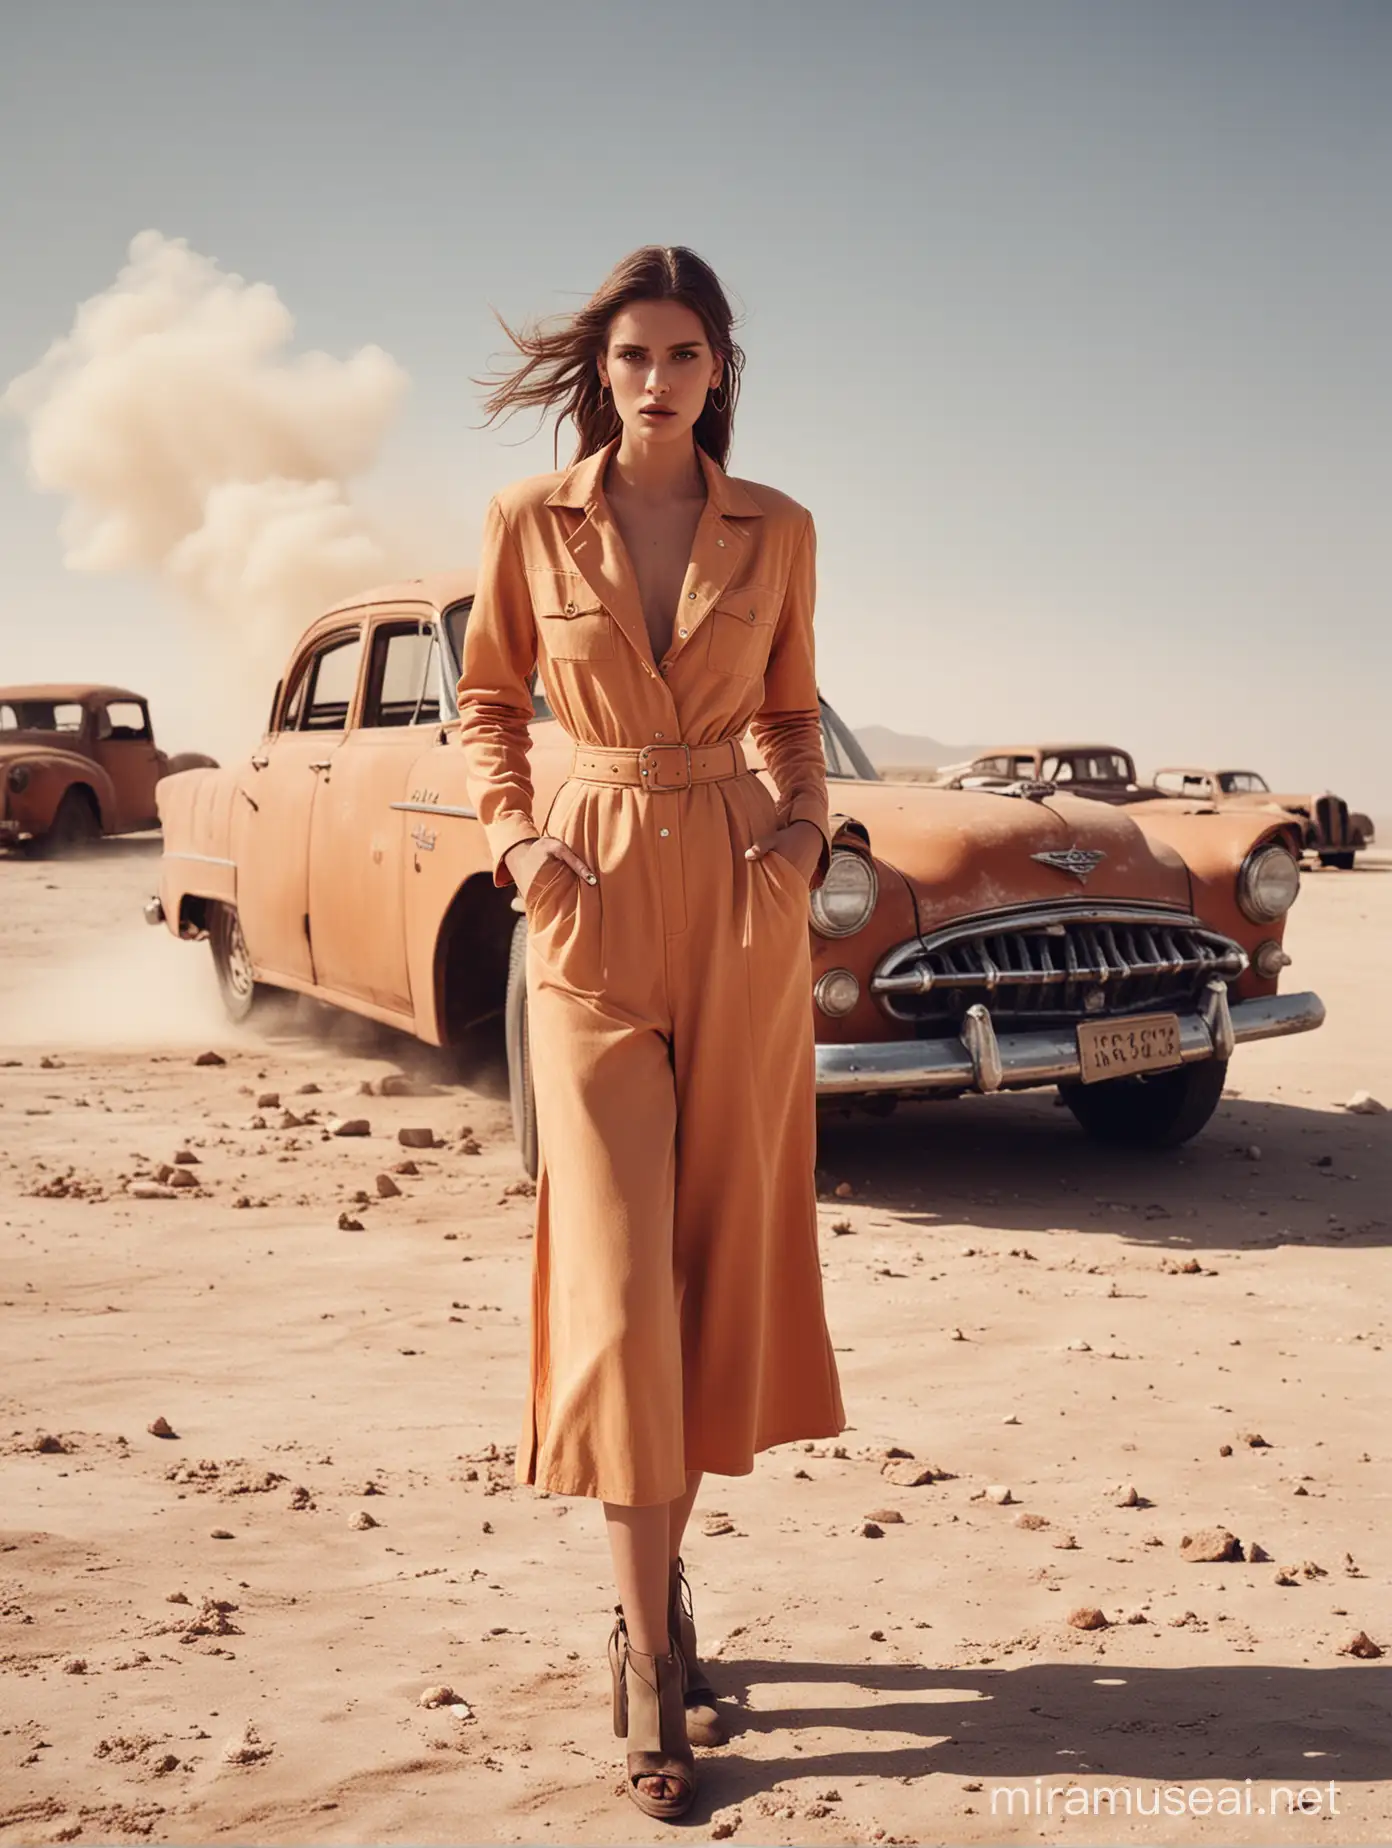 I want mood images in the style of a vogue magazine fashion shooting, showing an empowered woman what is standing in a salt desert with old cars that are set on fire. it should be very realistic and have a strong fashion editorial look to it that can be seen in a high class fashion magazine